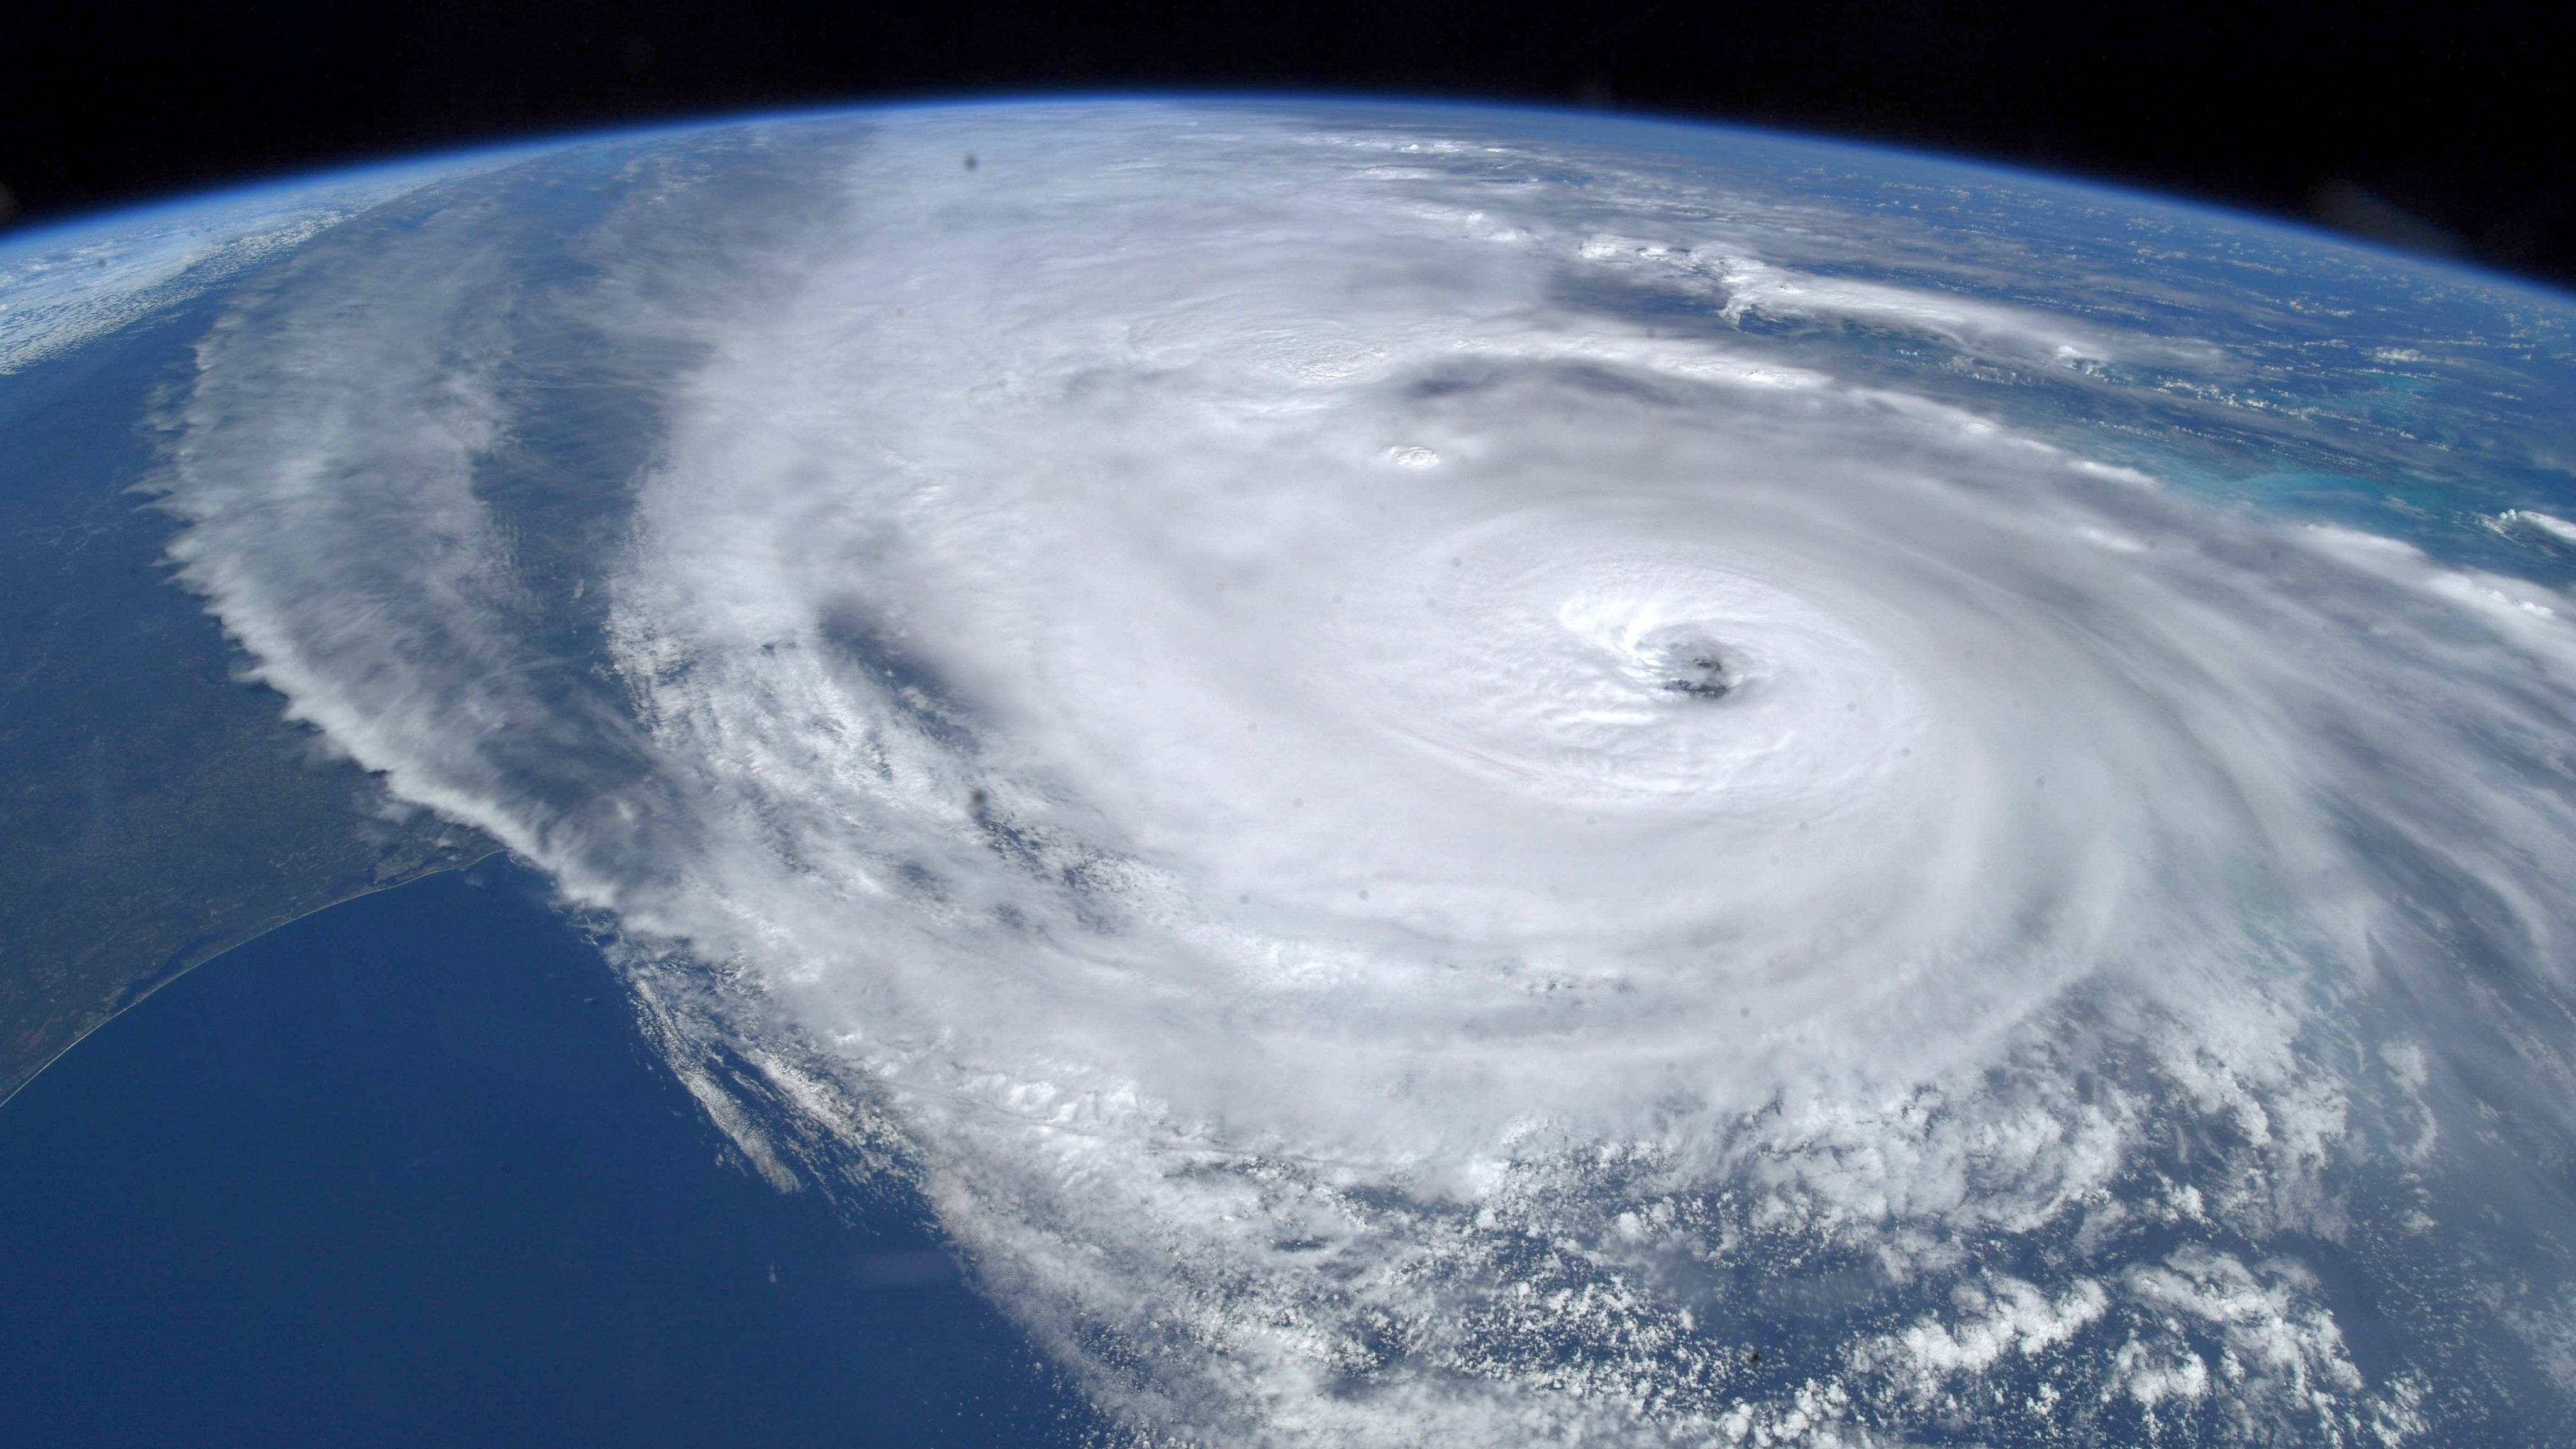 hurricane visible from space over land and water. the curve of the earth is visible